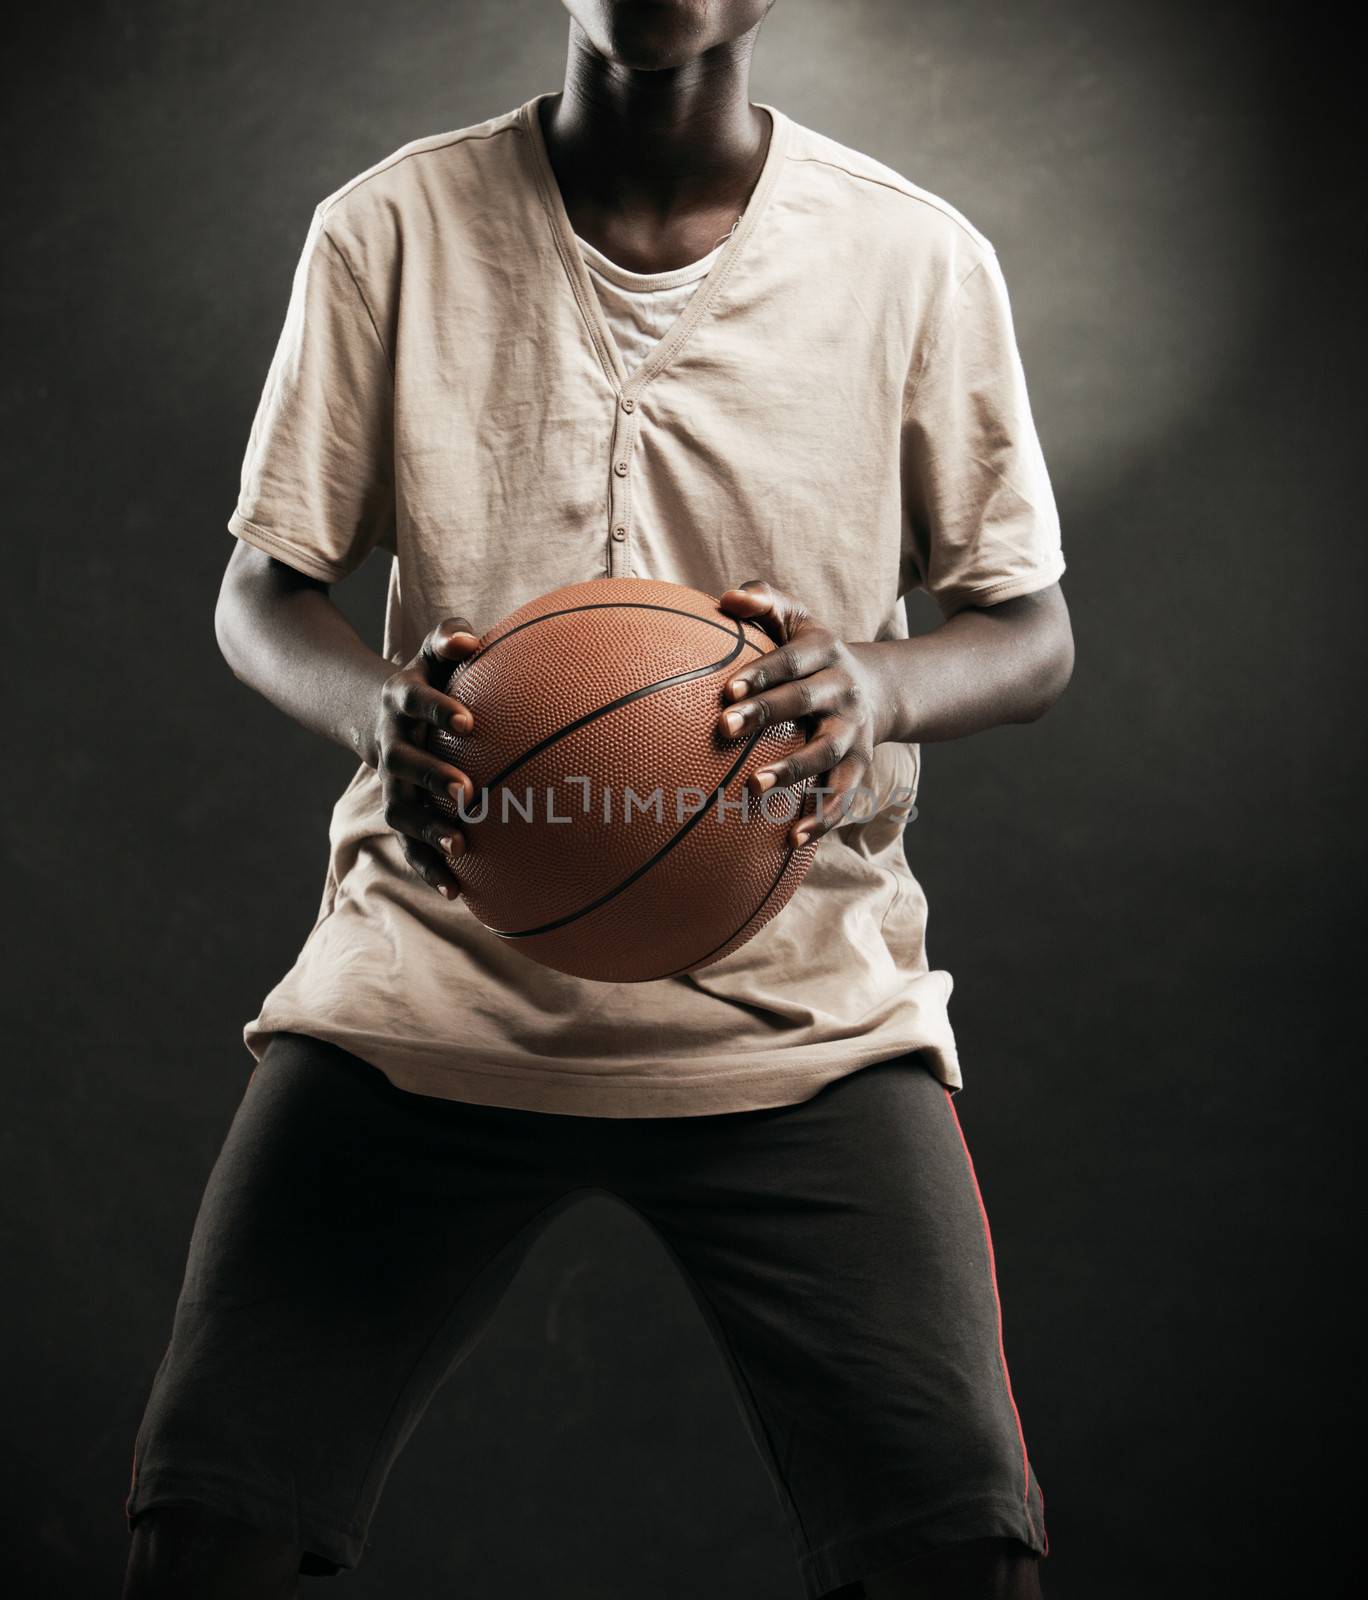 An African boy concentrating to shoot a basketball